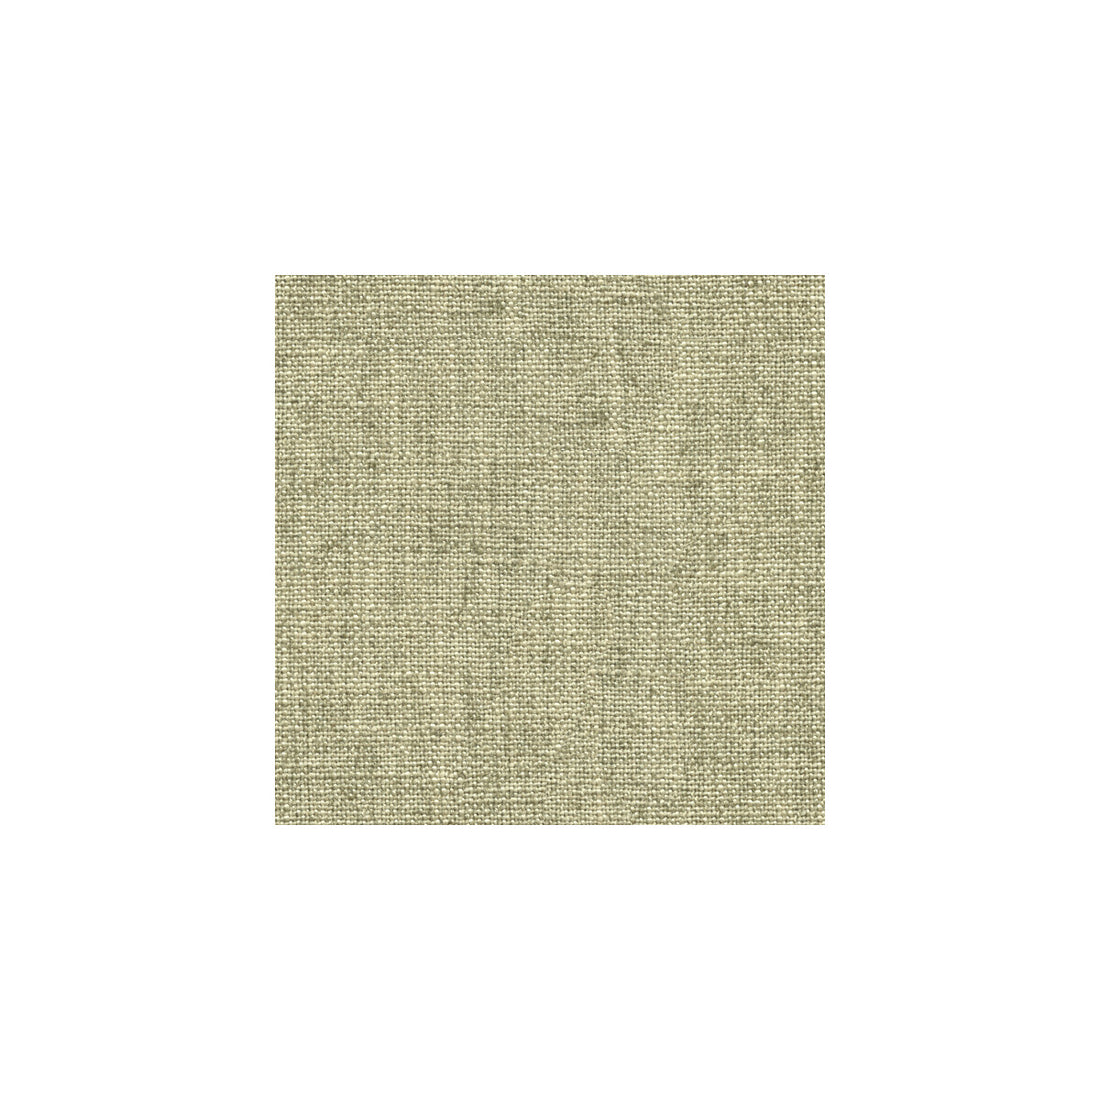 Denman fabric in stone color - pattern 33008.106.0 - by Kravet Basics in the Sarah Richardson Affinity collection